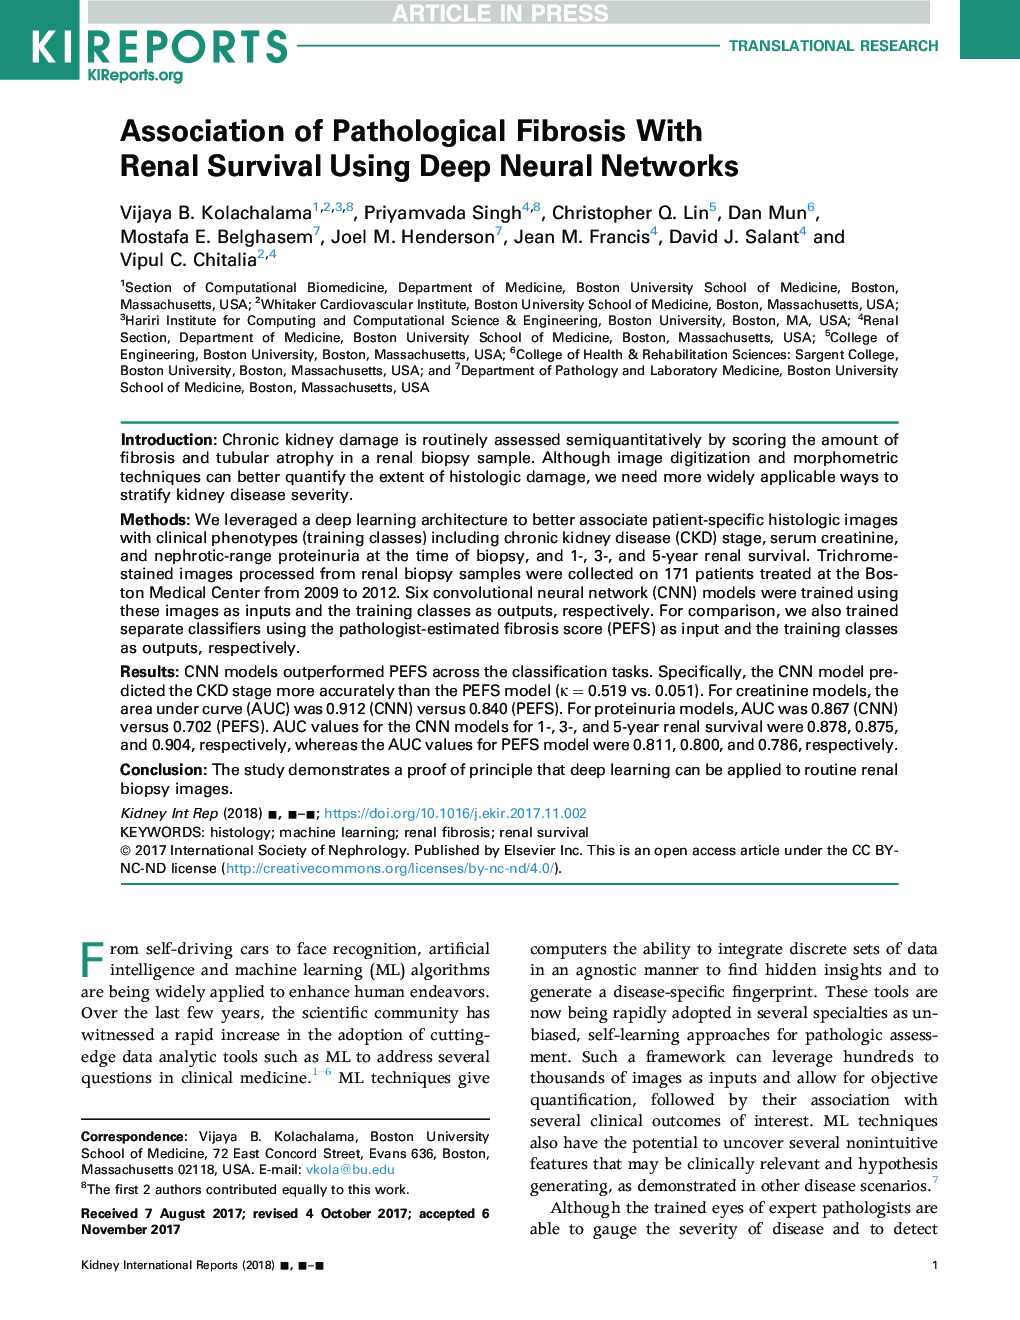 Association of Pathological Fibrosis With Renal Survival Using Deep Neural Networks